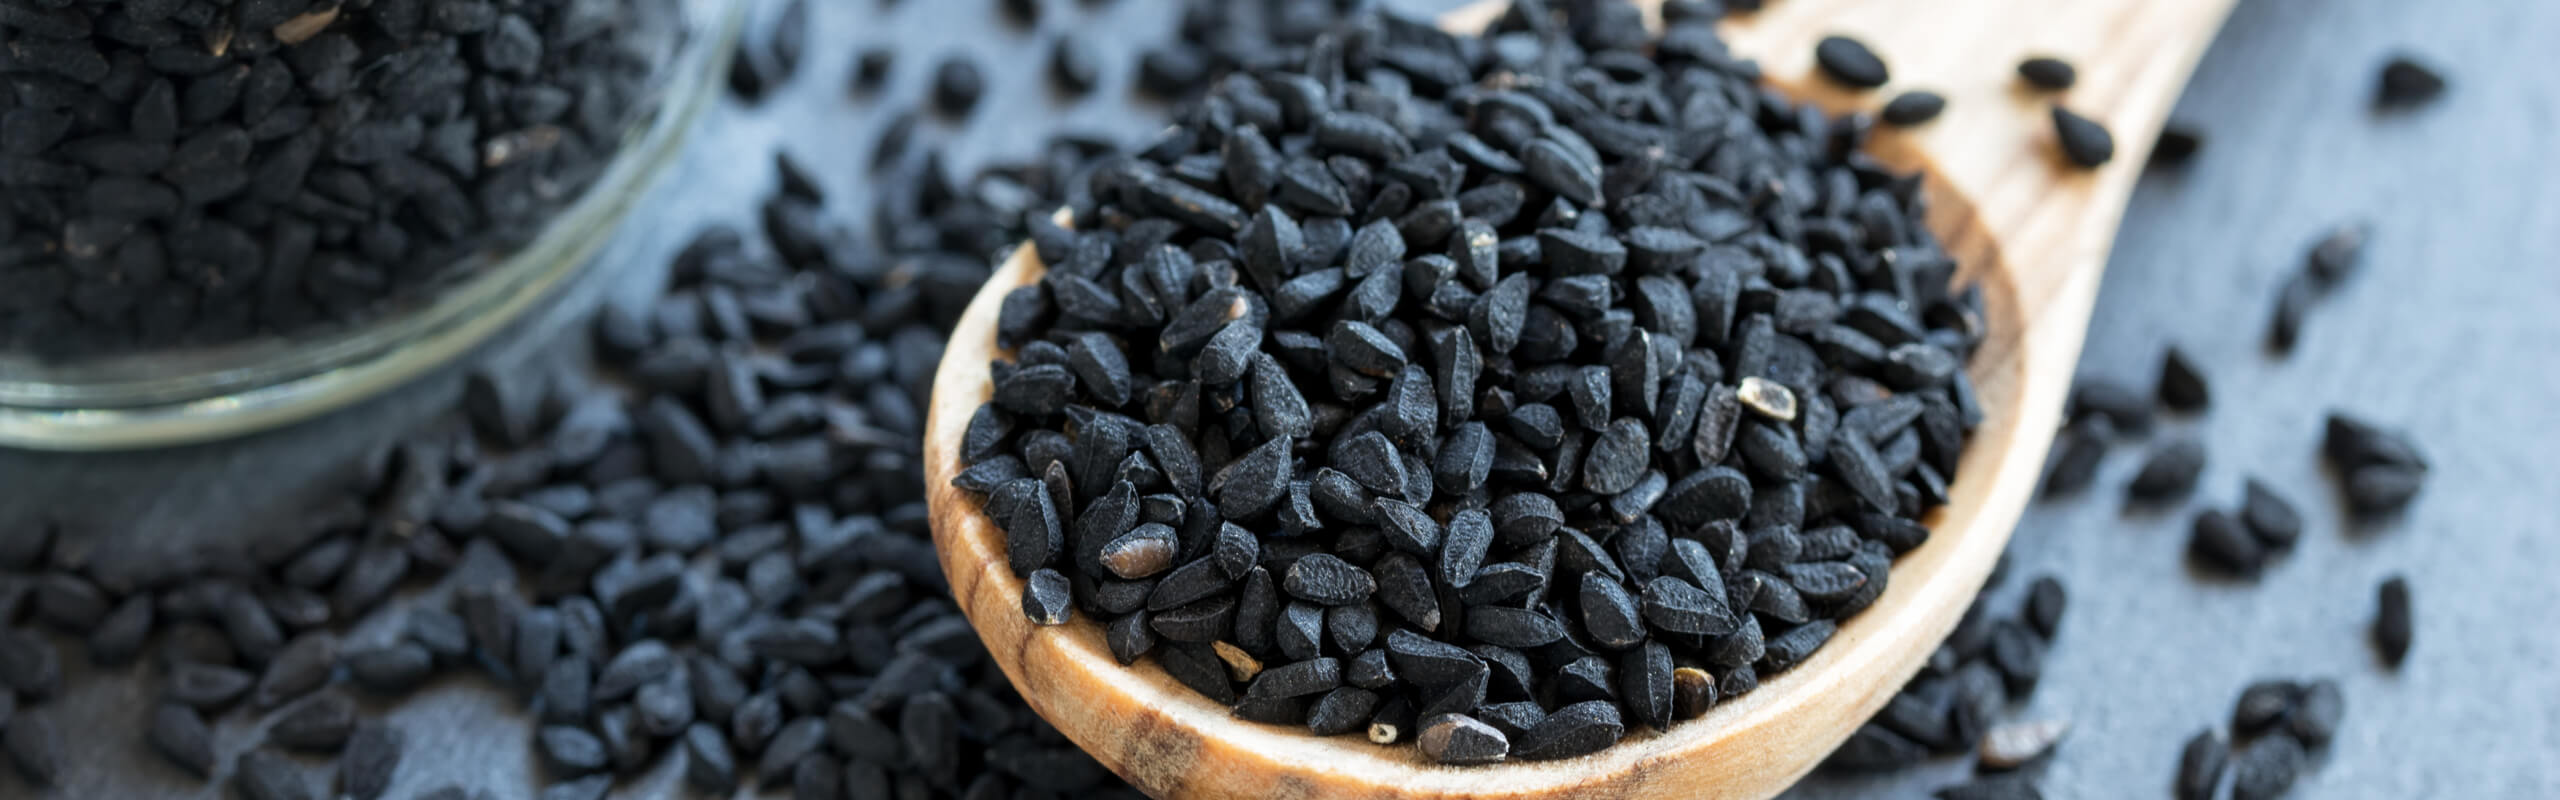 Black Cumin Seed Health Benefits WholisticMatters 32340 Hot Sex Picture photo